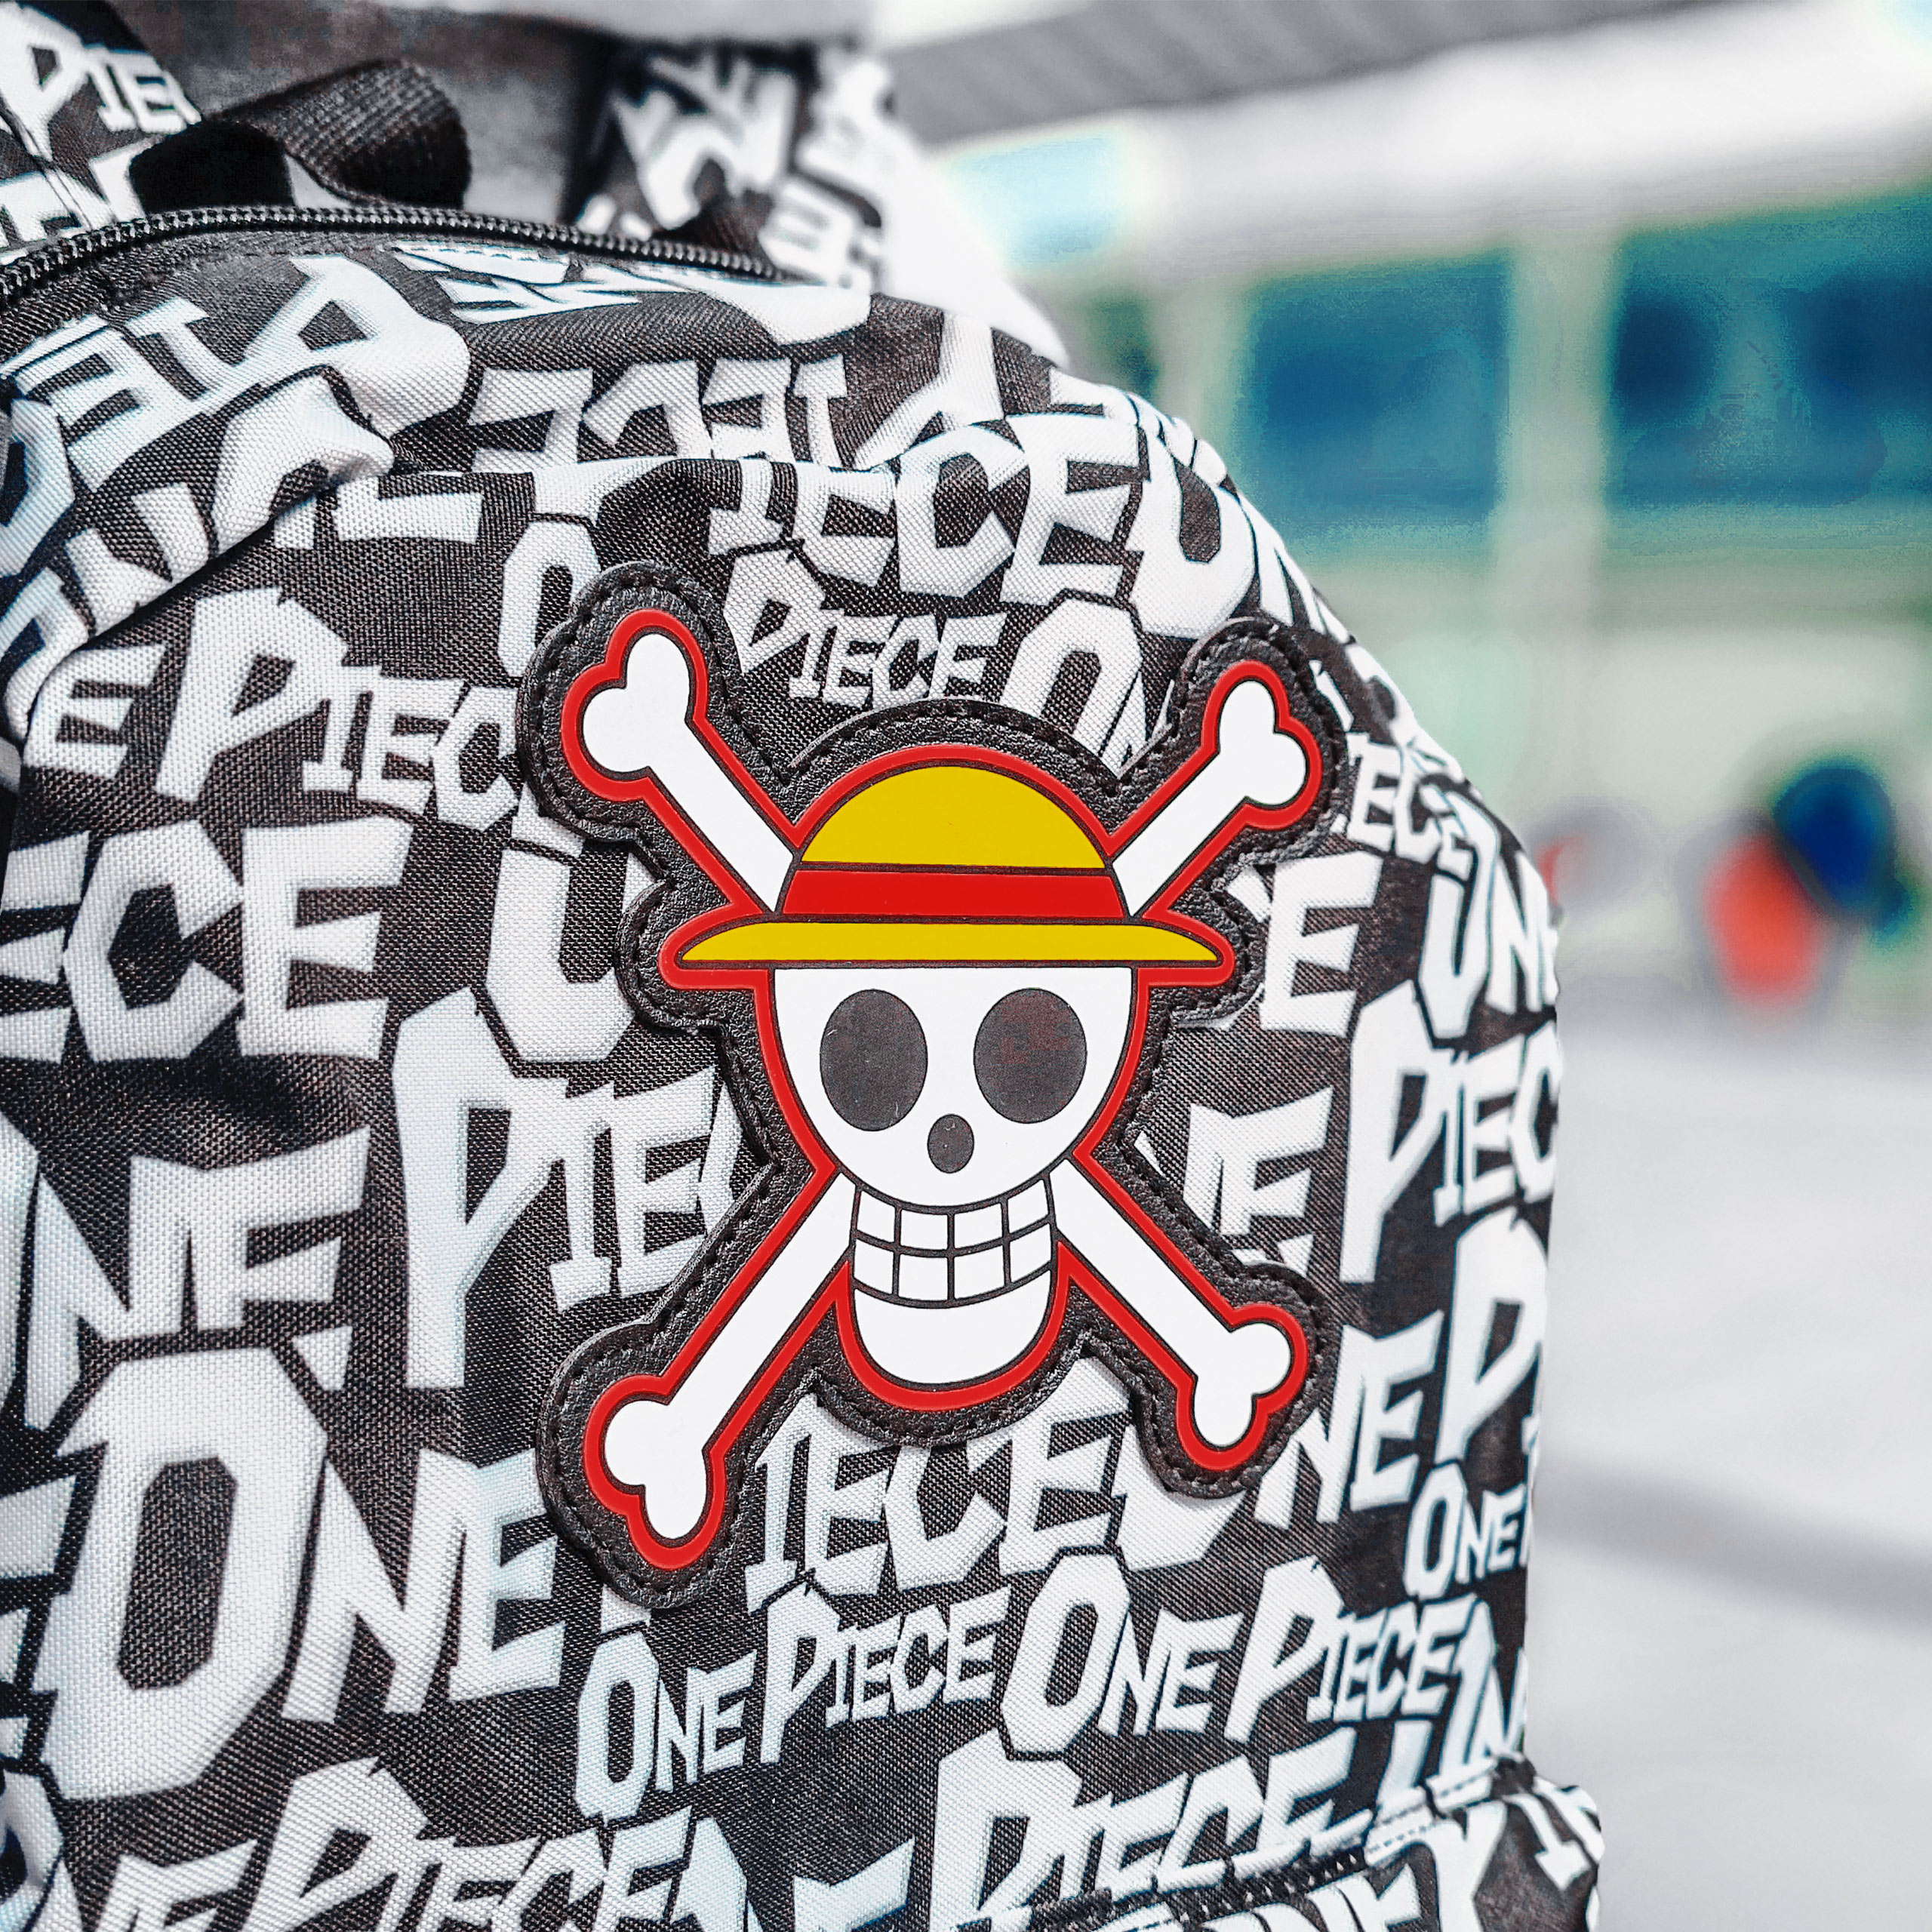 Backpack One Piece - Skull